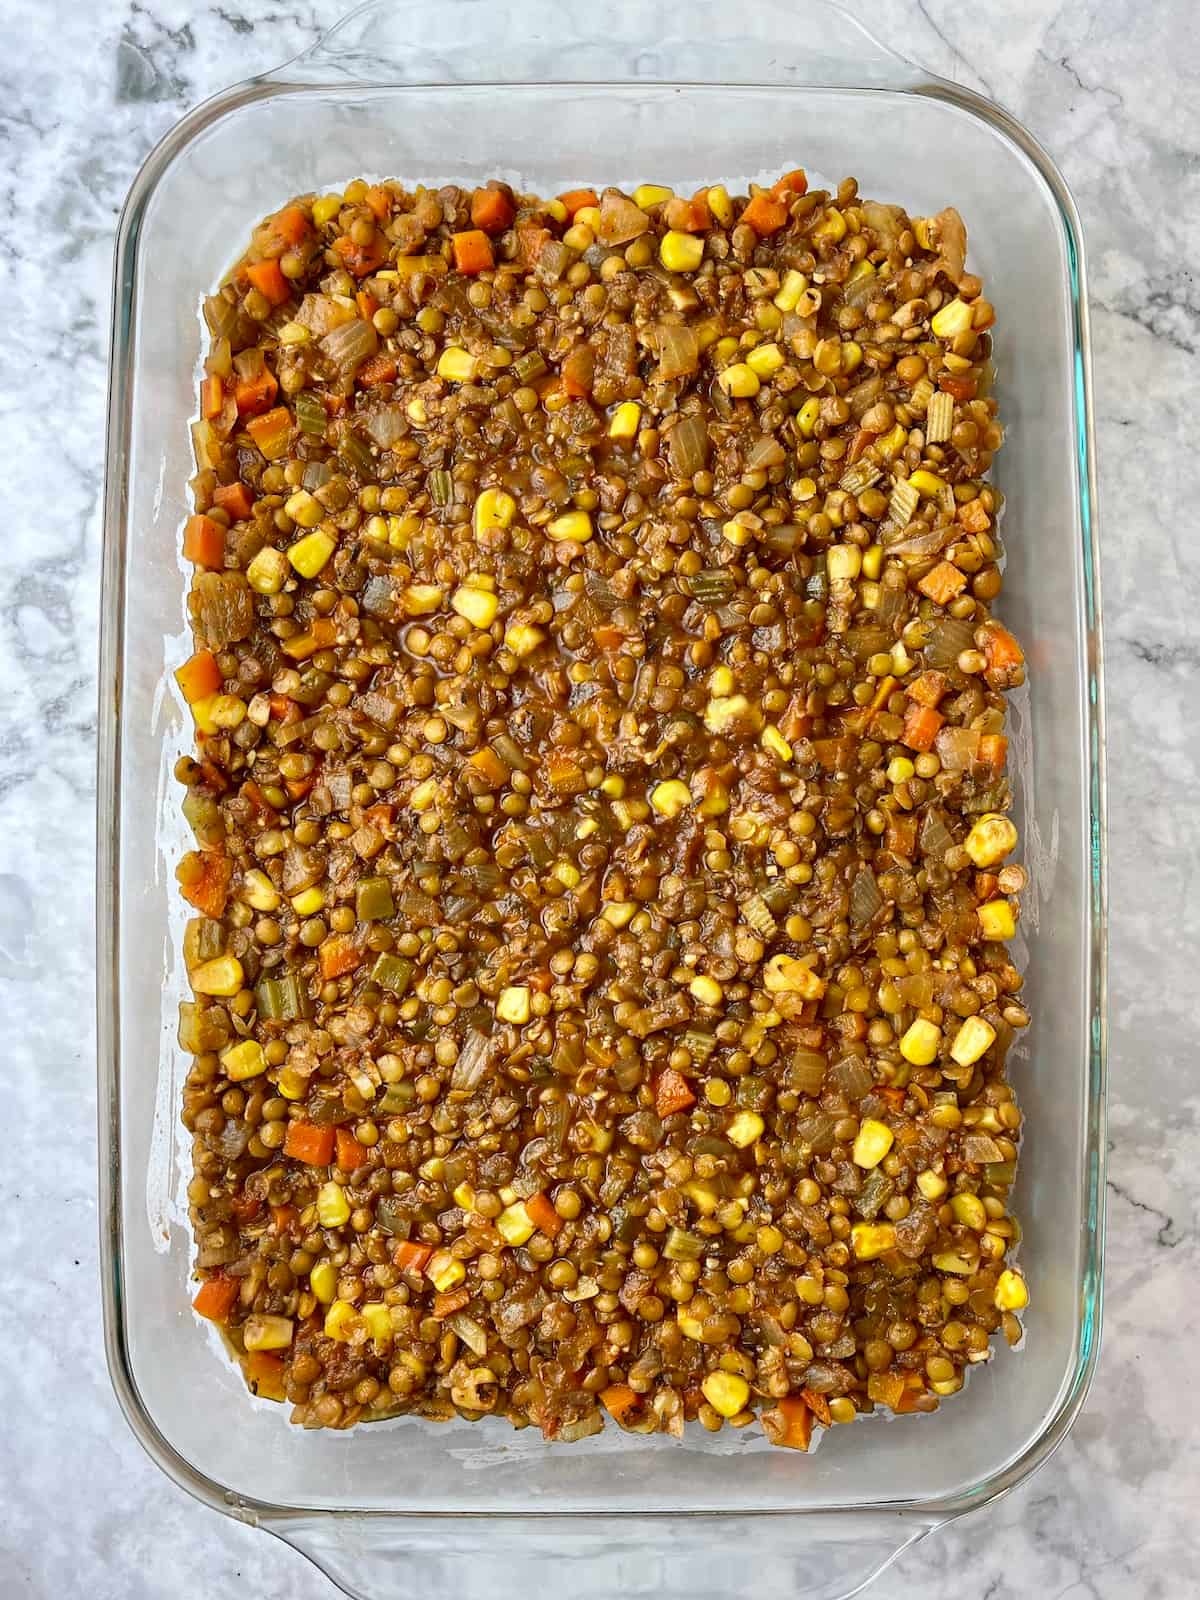 A large dish with a lentil shepherd's pie filling in it.